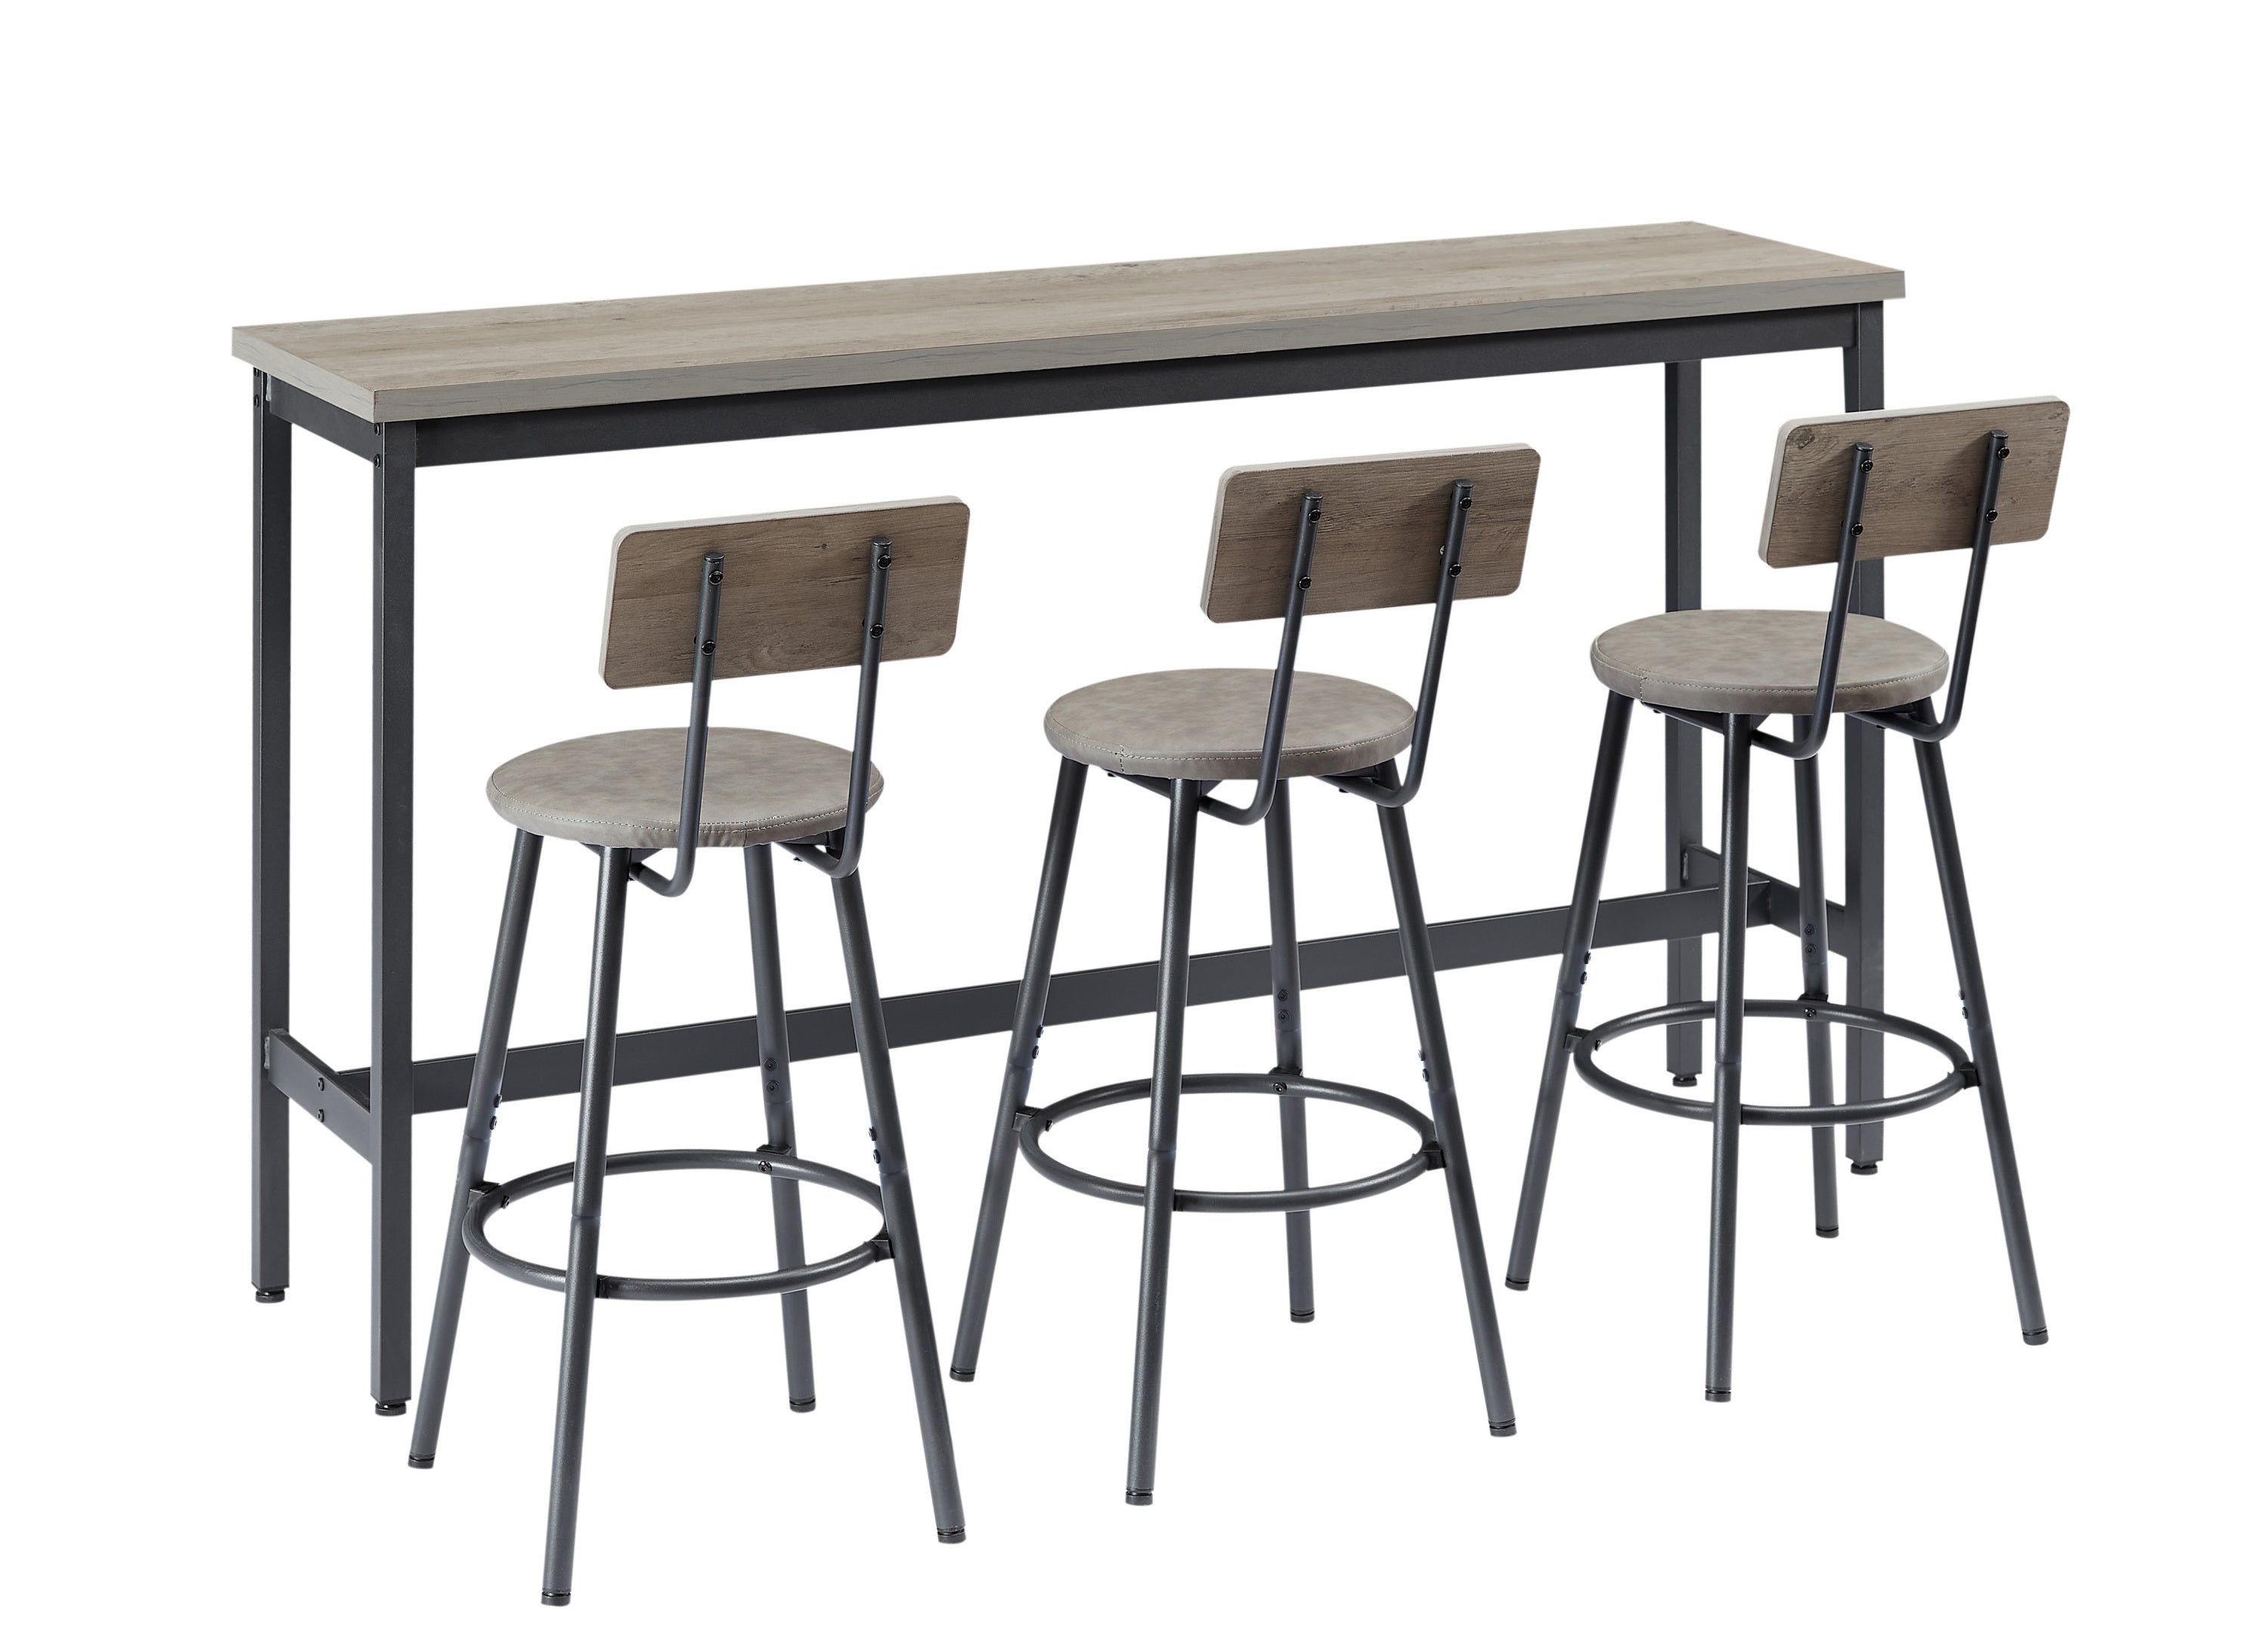 American-style long table and chair combination